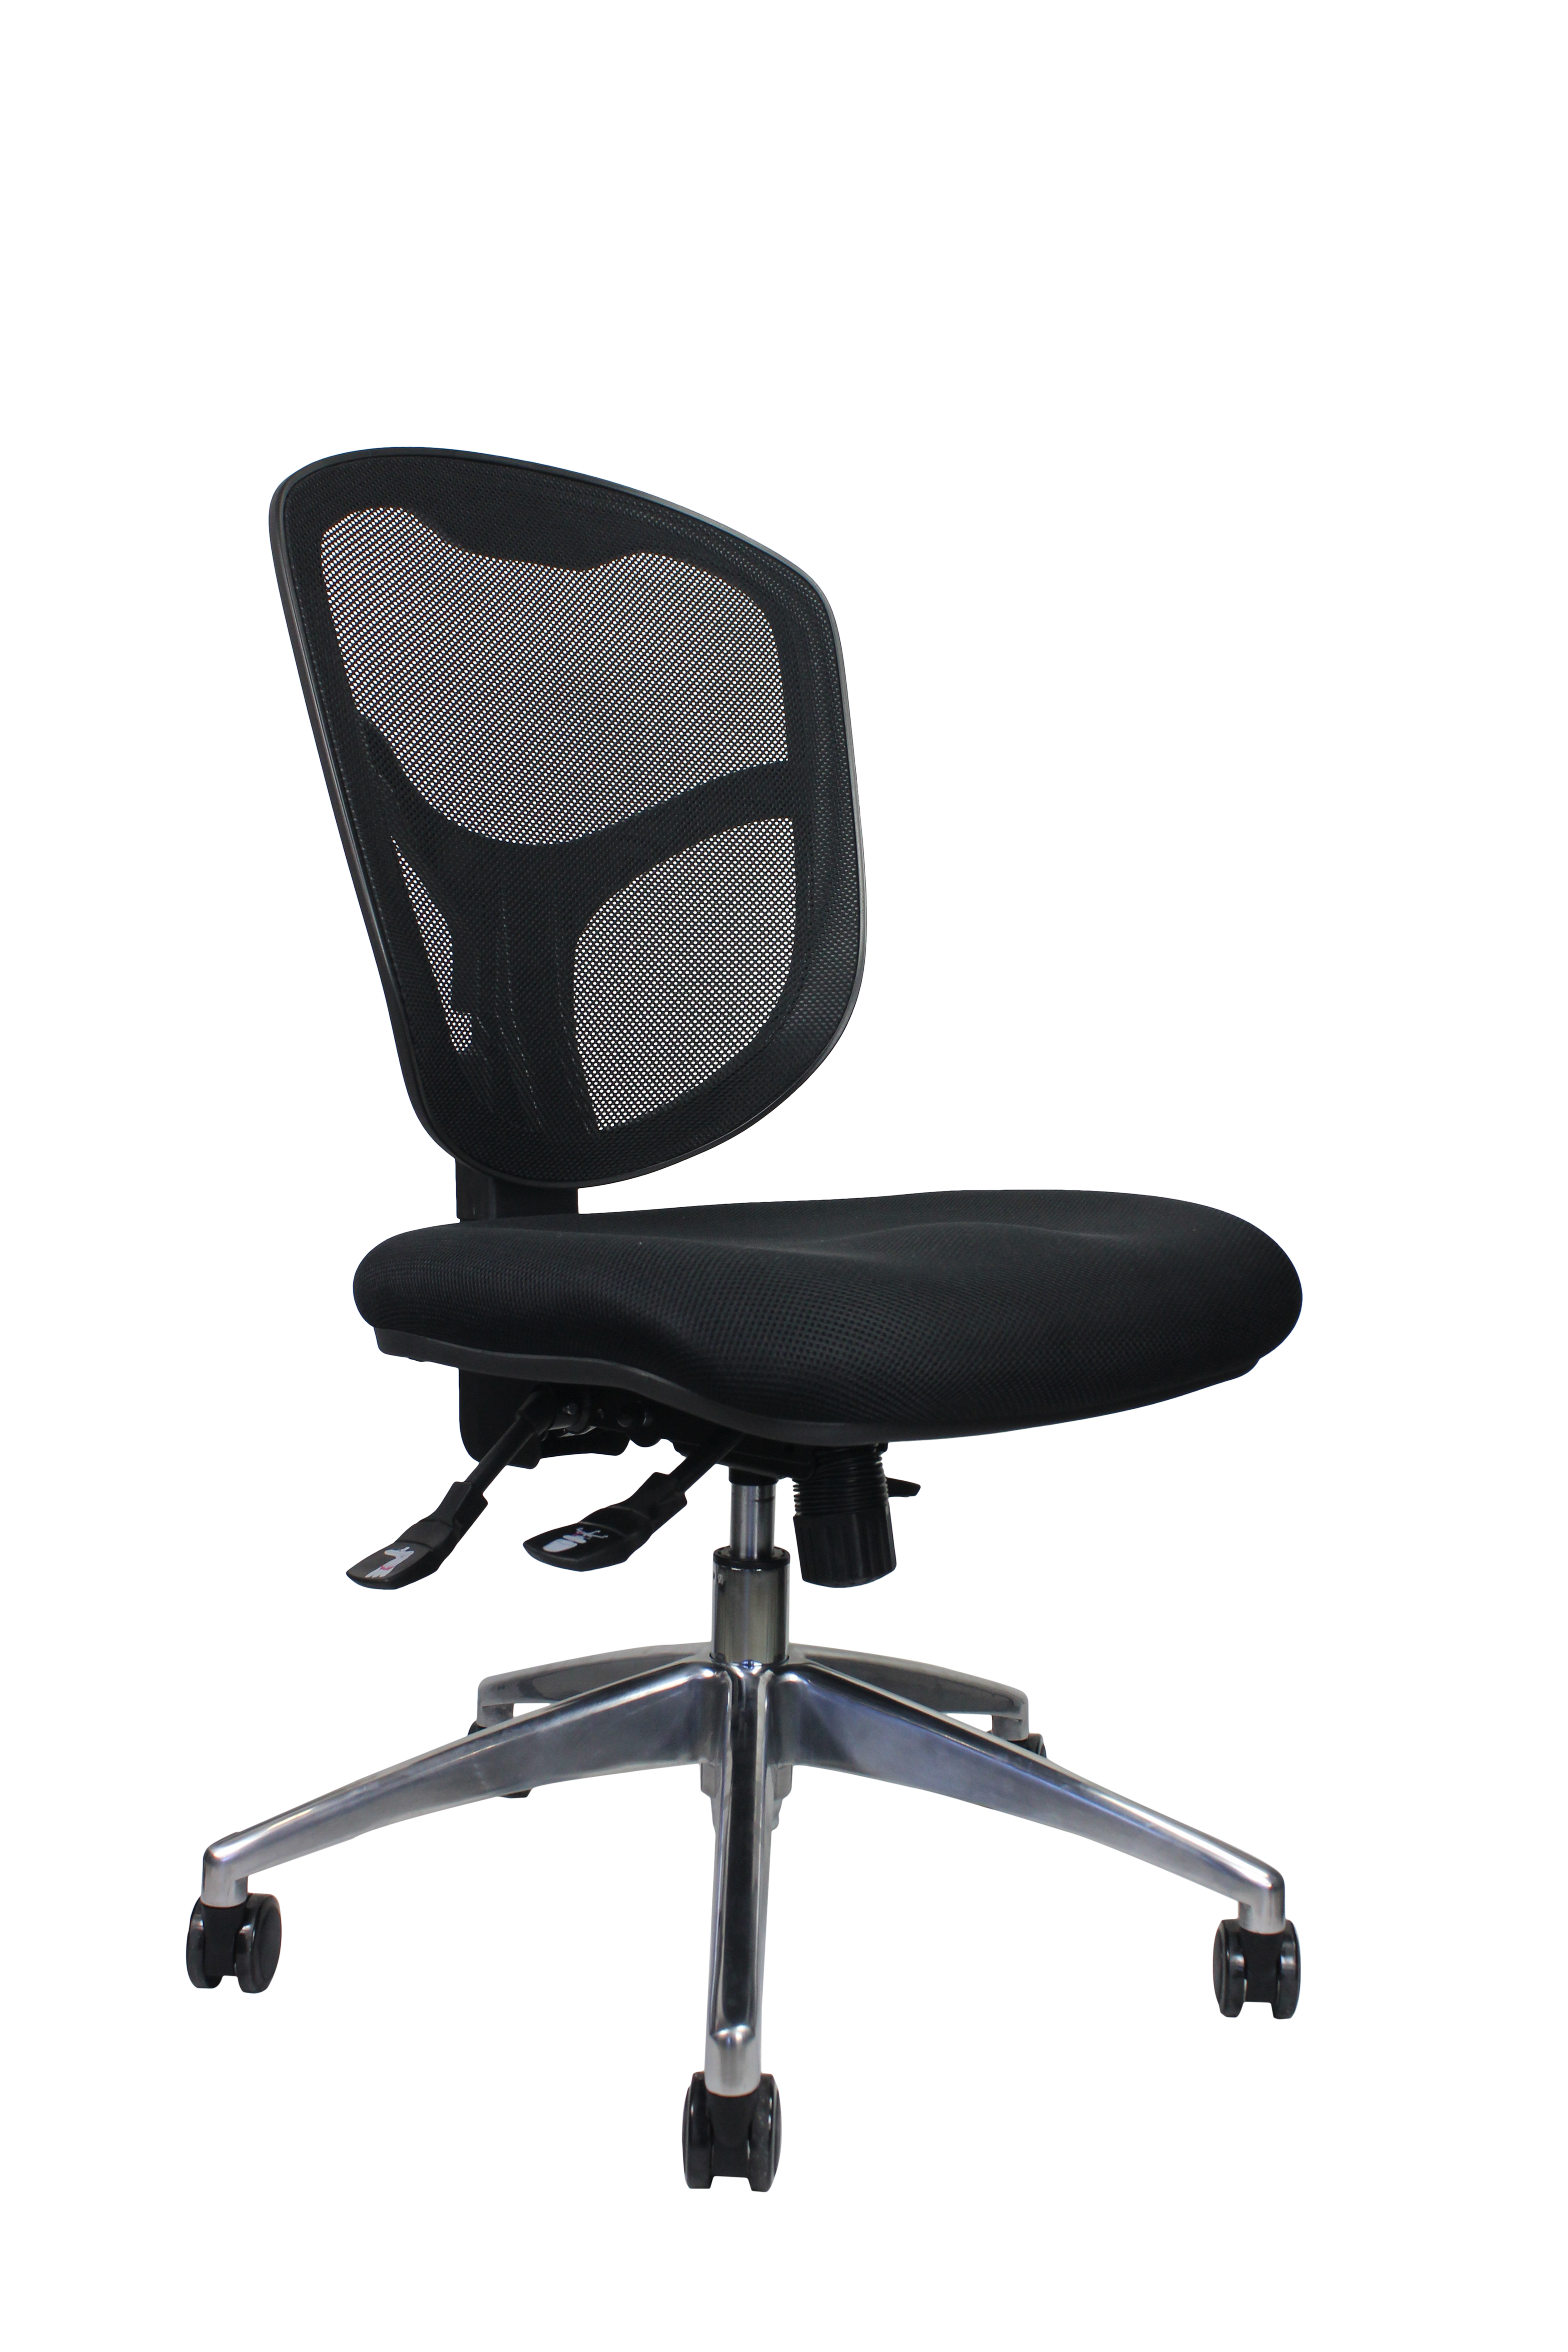 3L Ergonomic Mesh Chair no Arms | Office Direct QLD